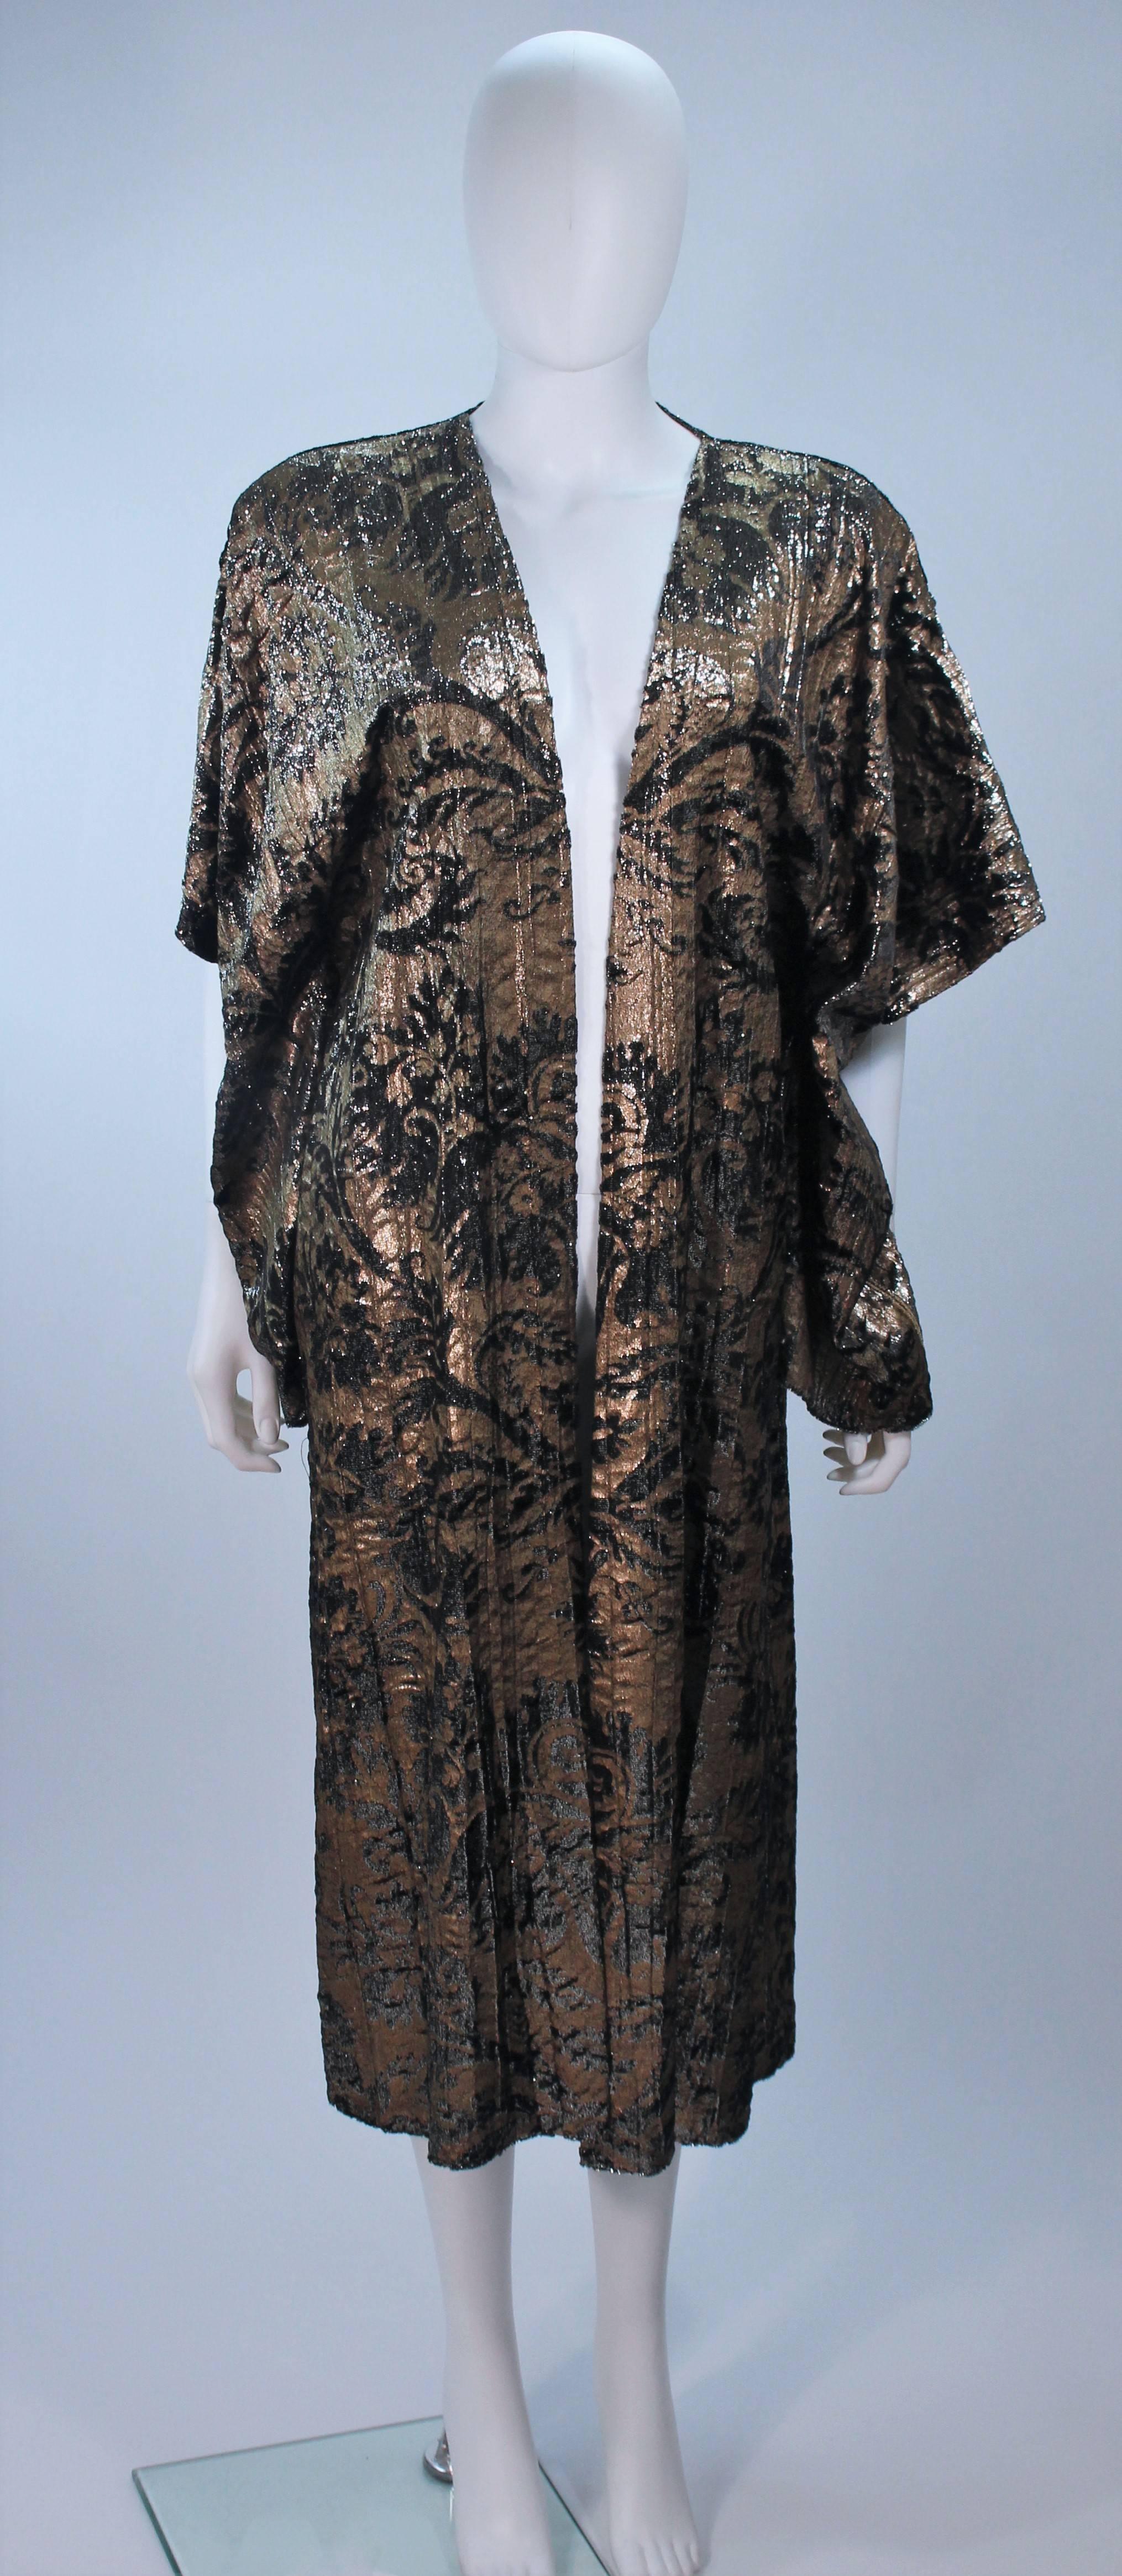  This Mali dcoat is composed of a painted metallic velvet silk. Features kimono sleeves with tassels and an open style. In great vintage condition. Made in Italy.

  **Please cross-reference measurements for personal accuracy. Size in description